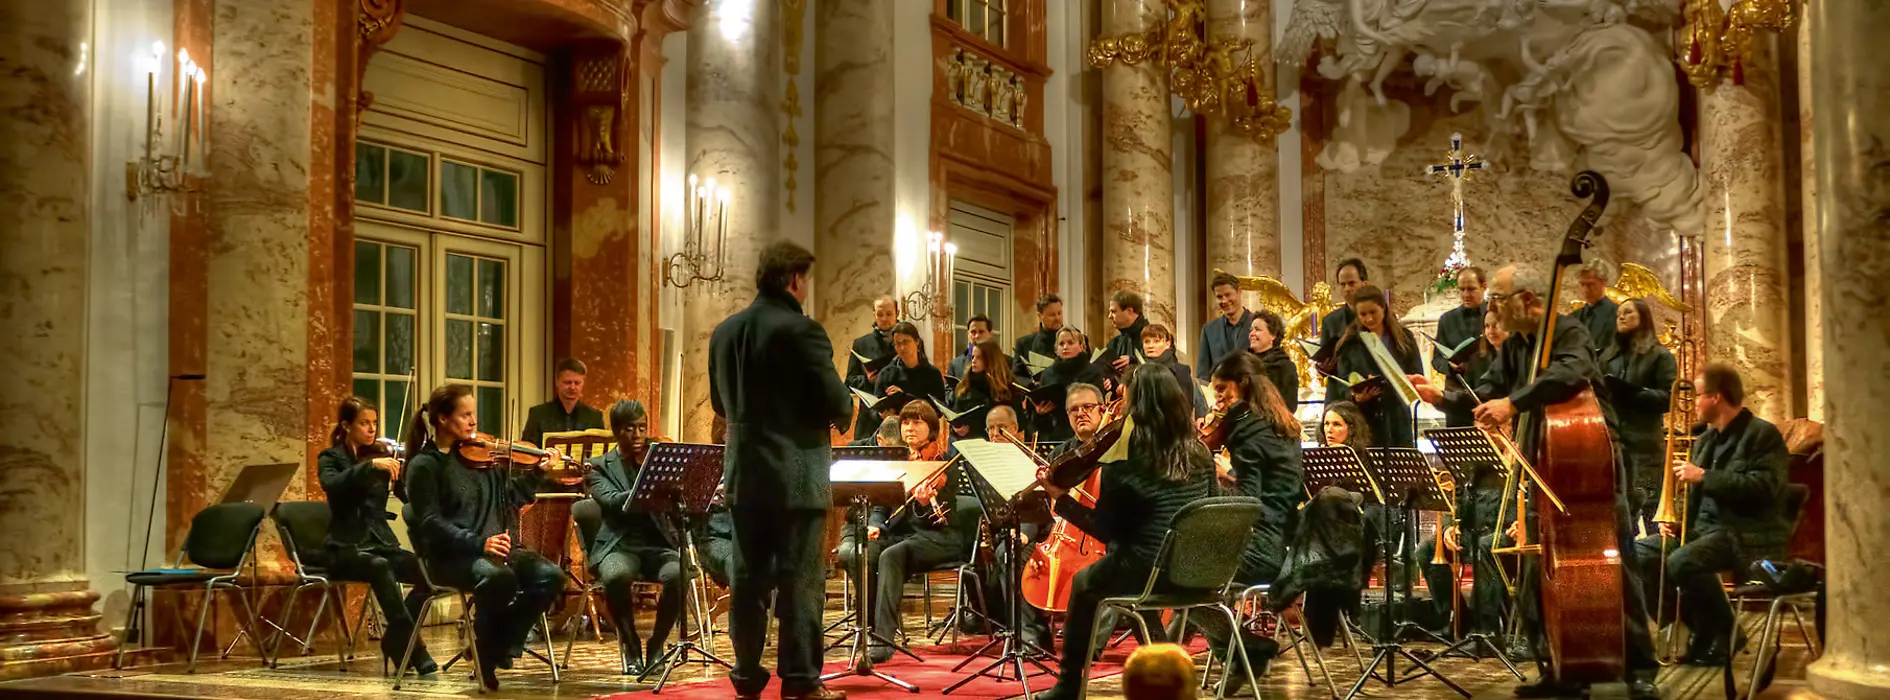 Orchestra in the Karlskirche (Church of St. Charles)